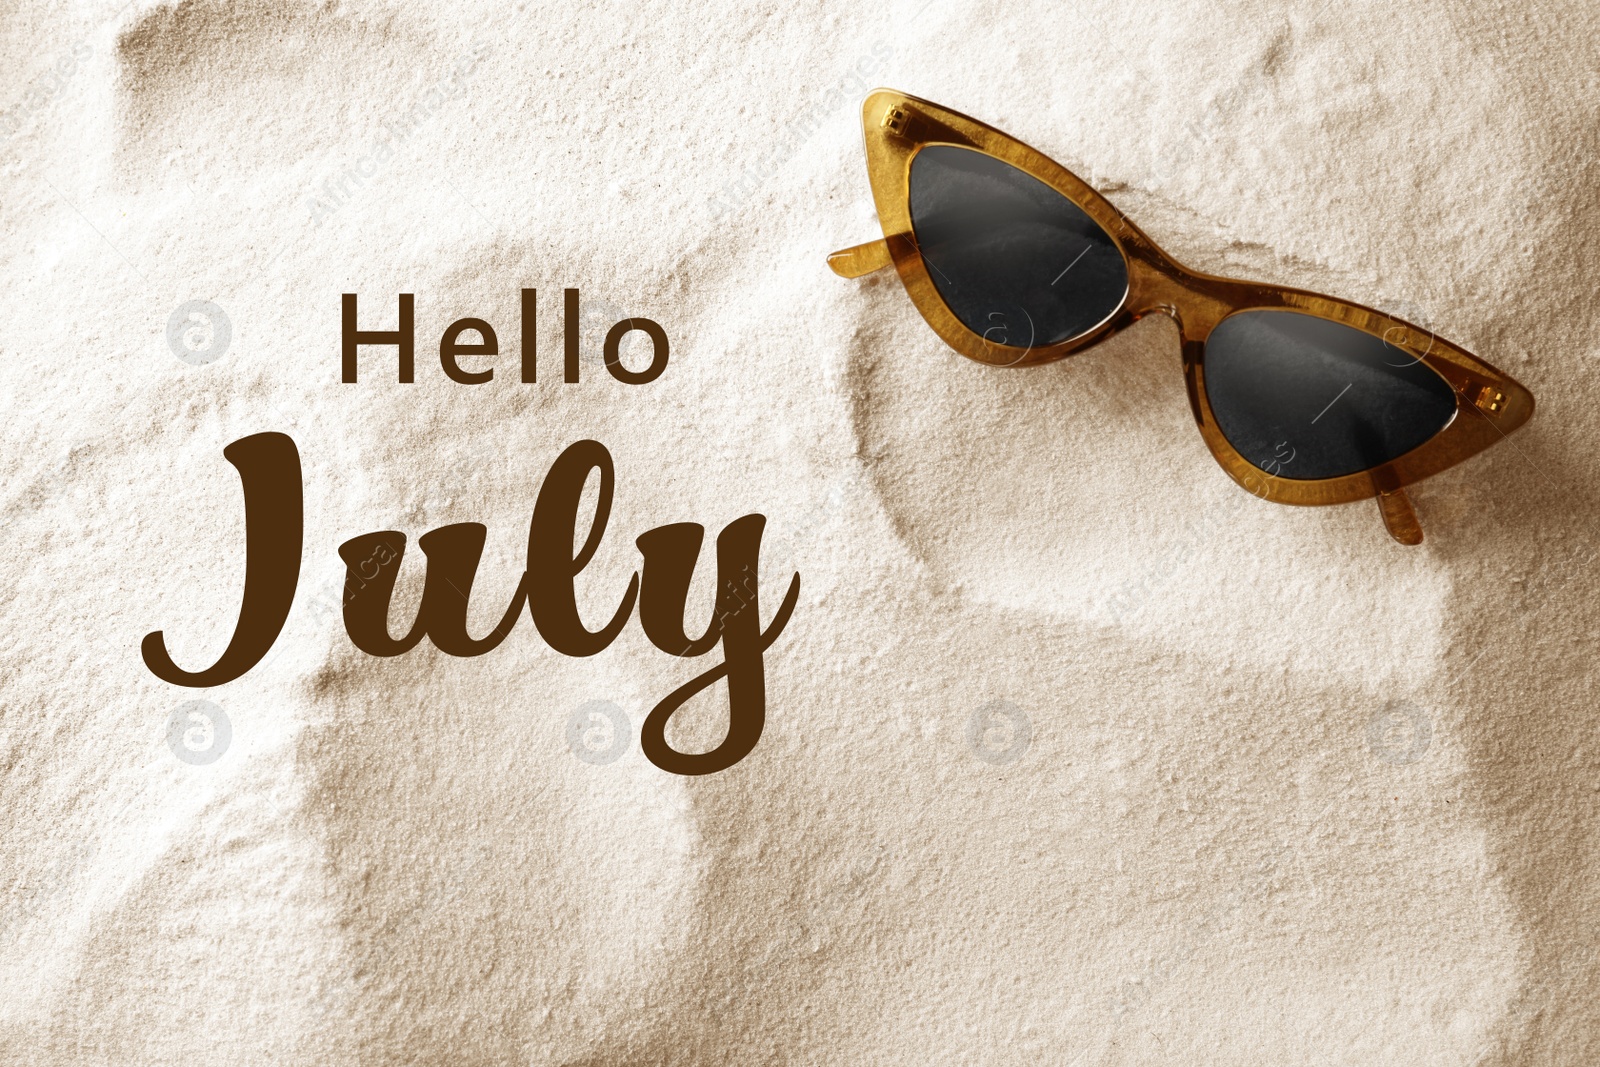 Image of Hello July. Stylish sunglasses on sand, top view